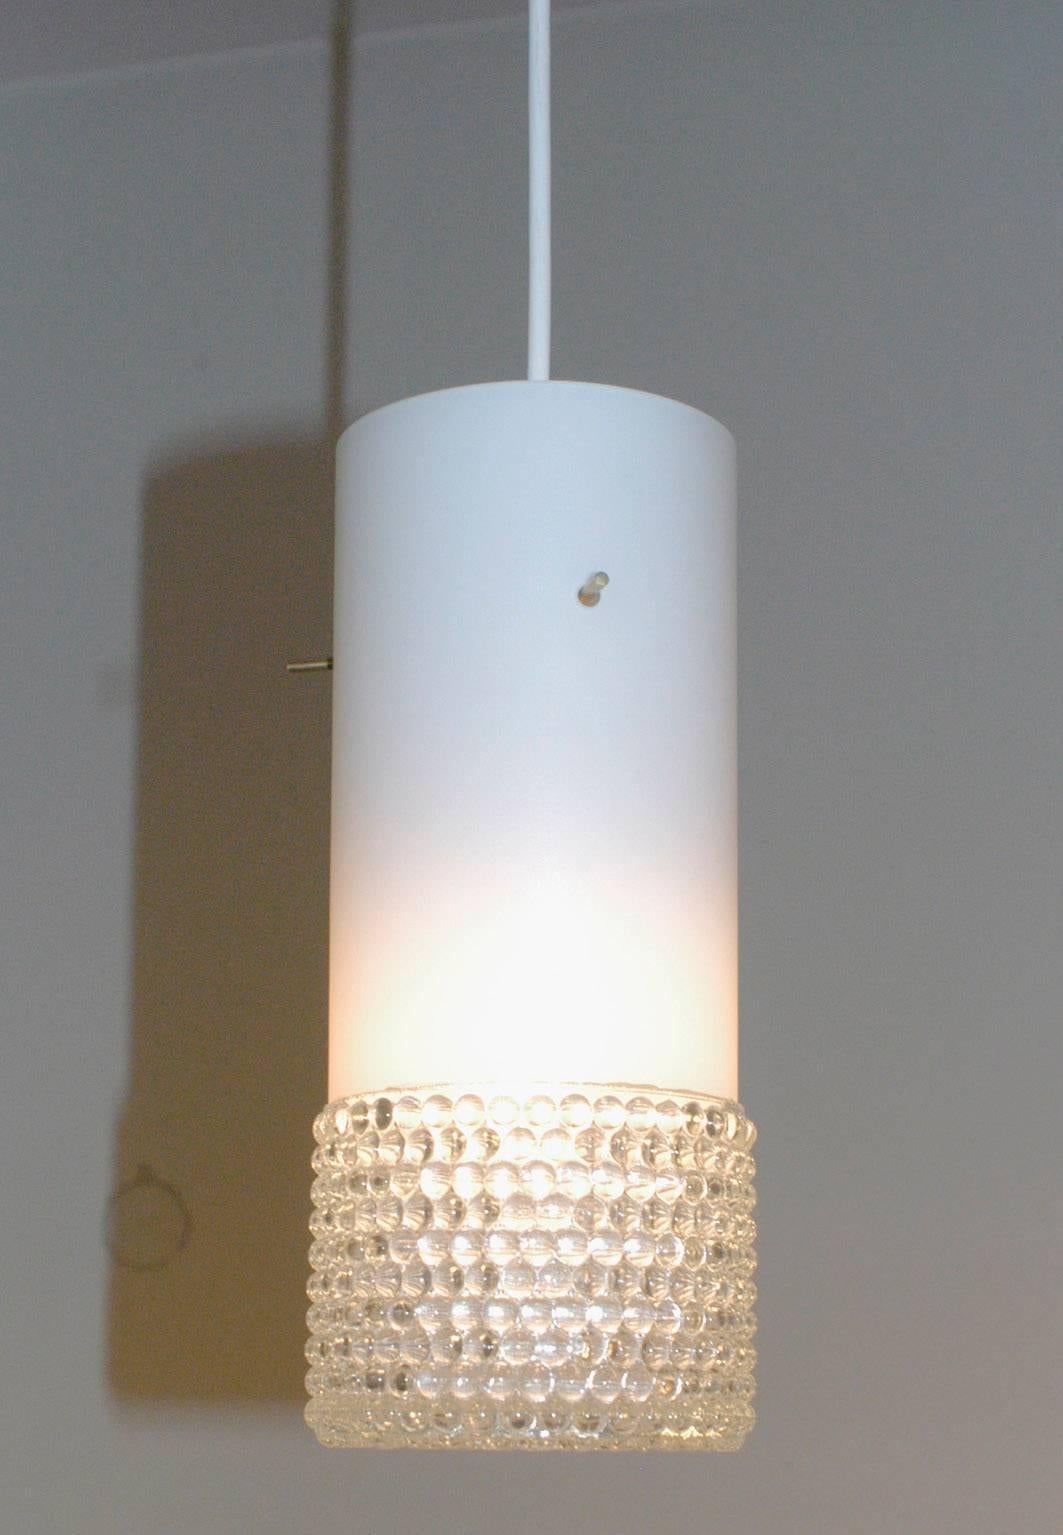 Set of three cylindrical opaline and bubble glass pendant lights with brass fittings, probably manufactured by Staff Leuchten Germany in the 1960s.